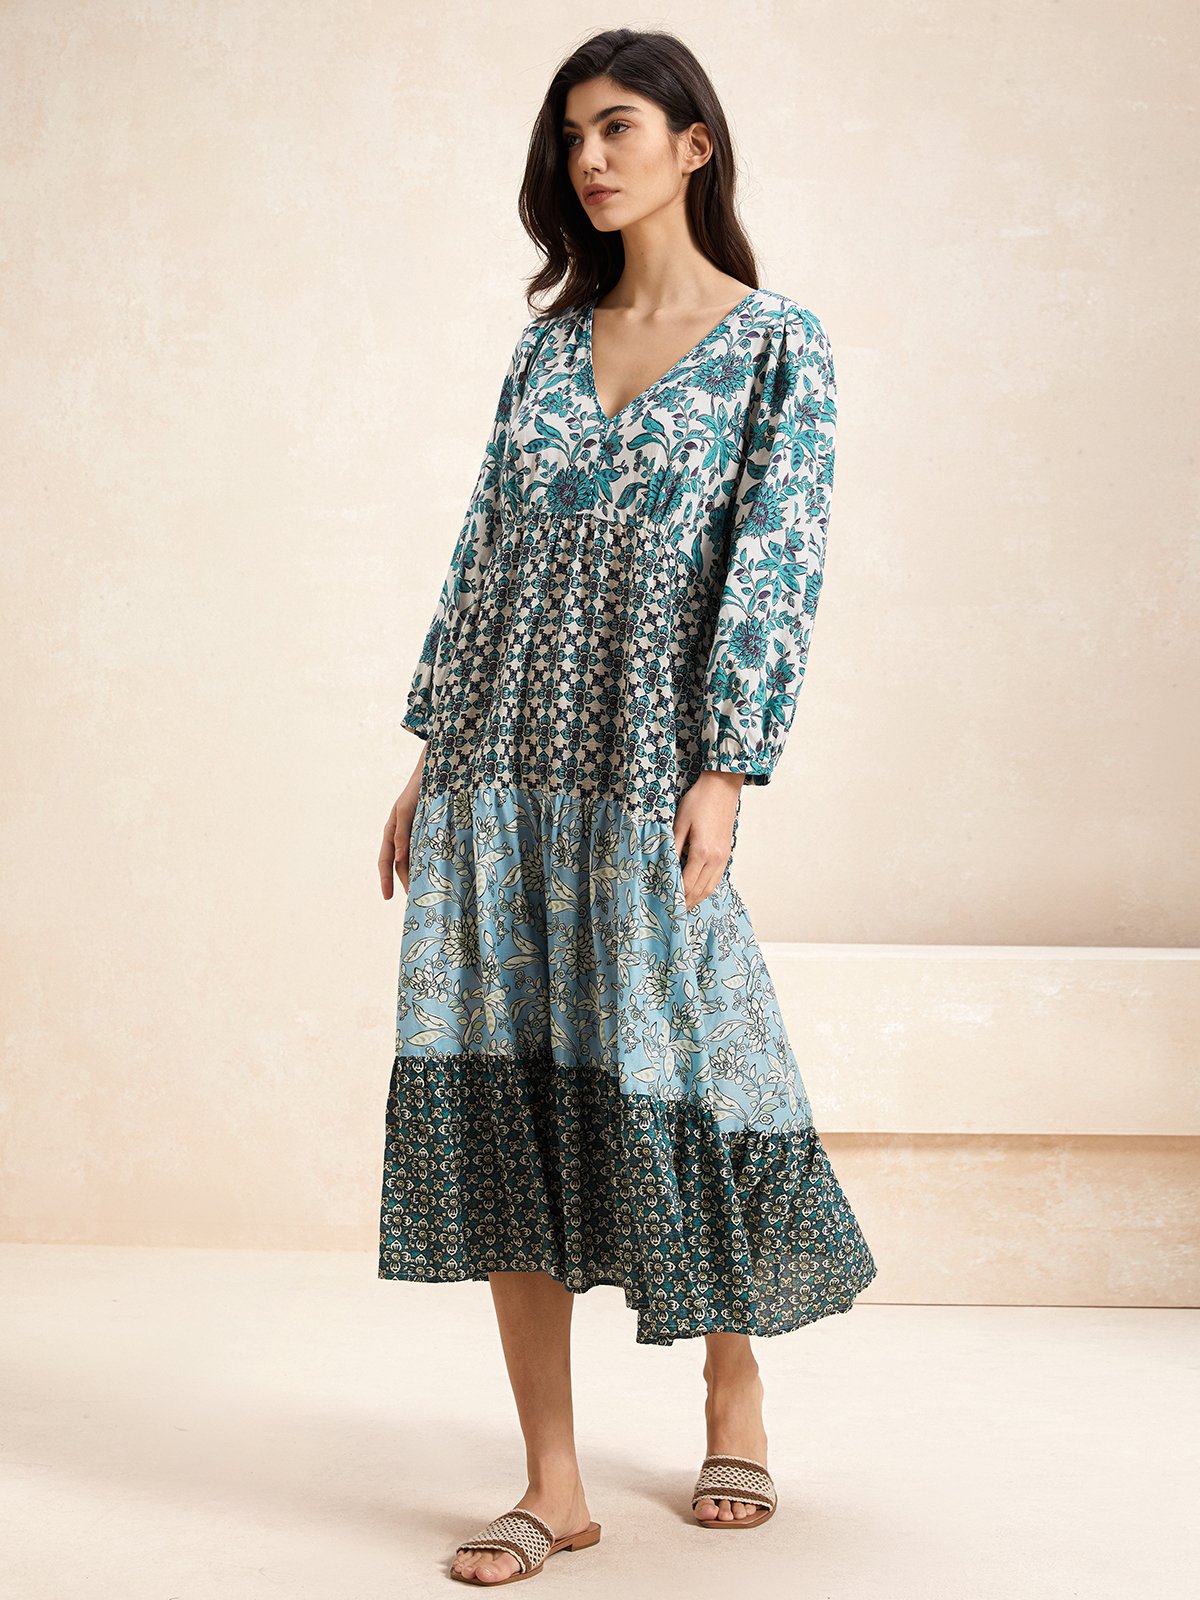 Women Floral Pattern V Neck Long Sleeve Comfy Casual Maxi Dress